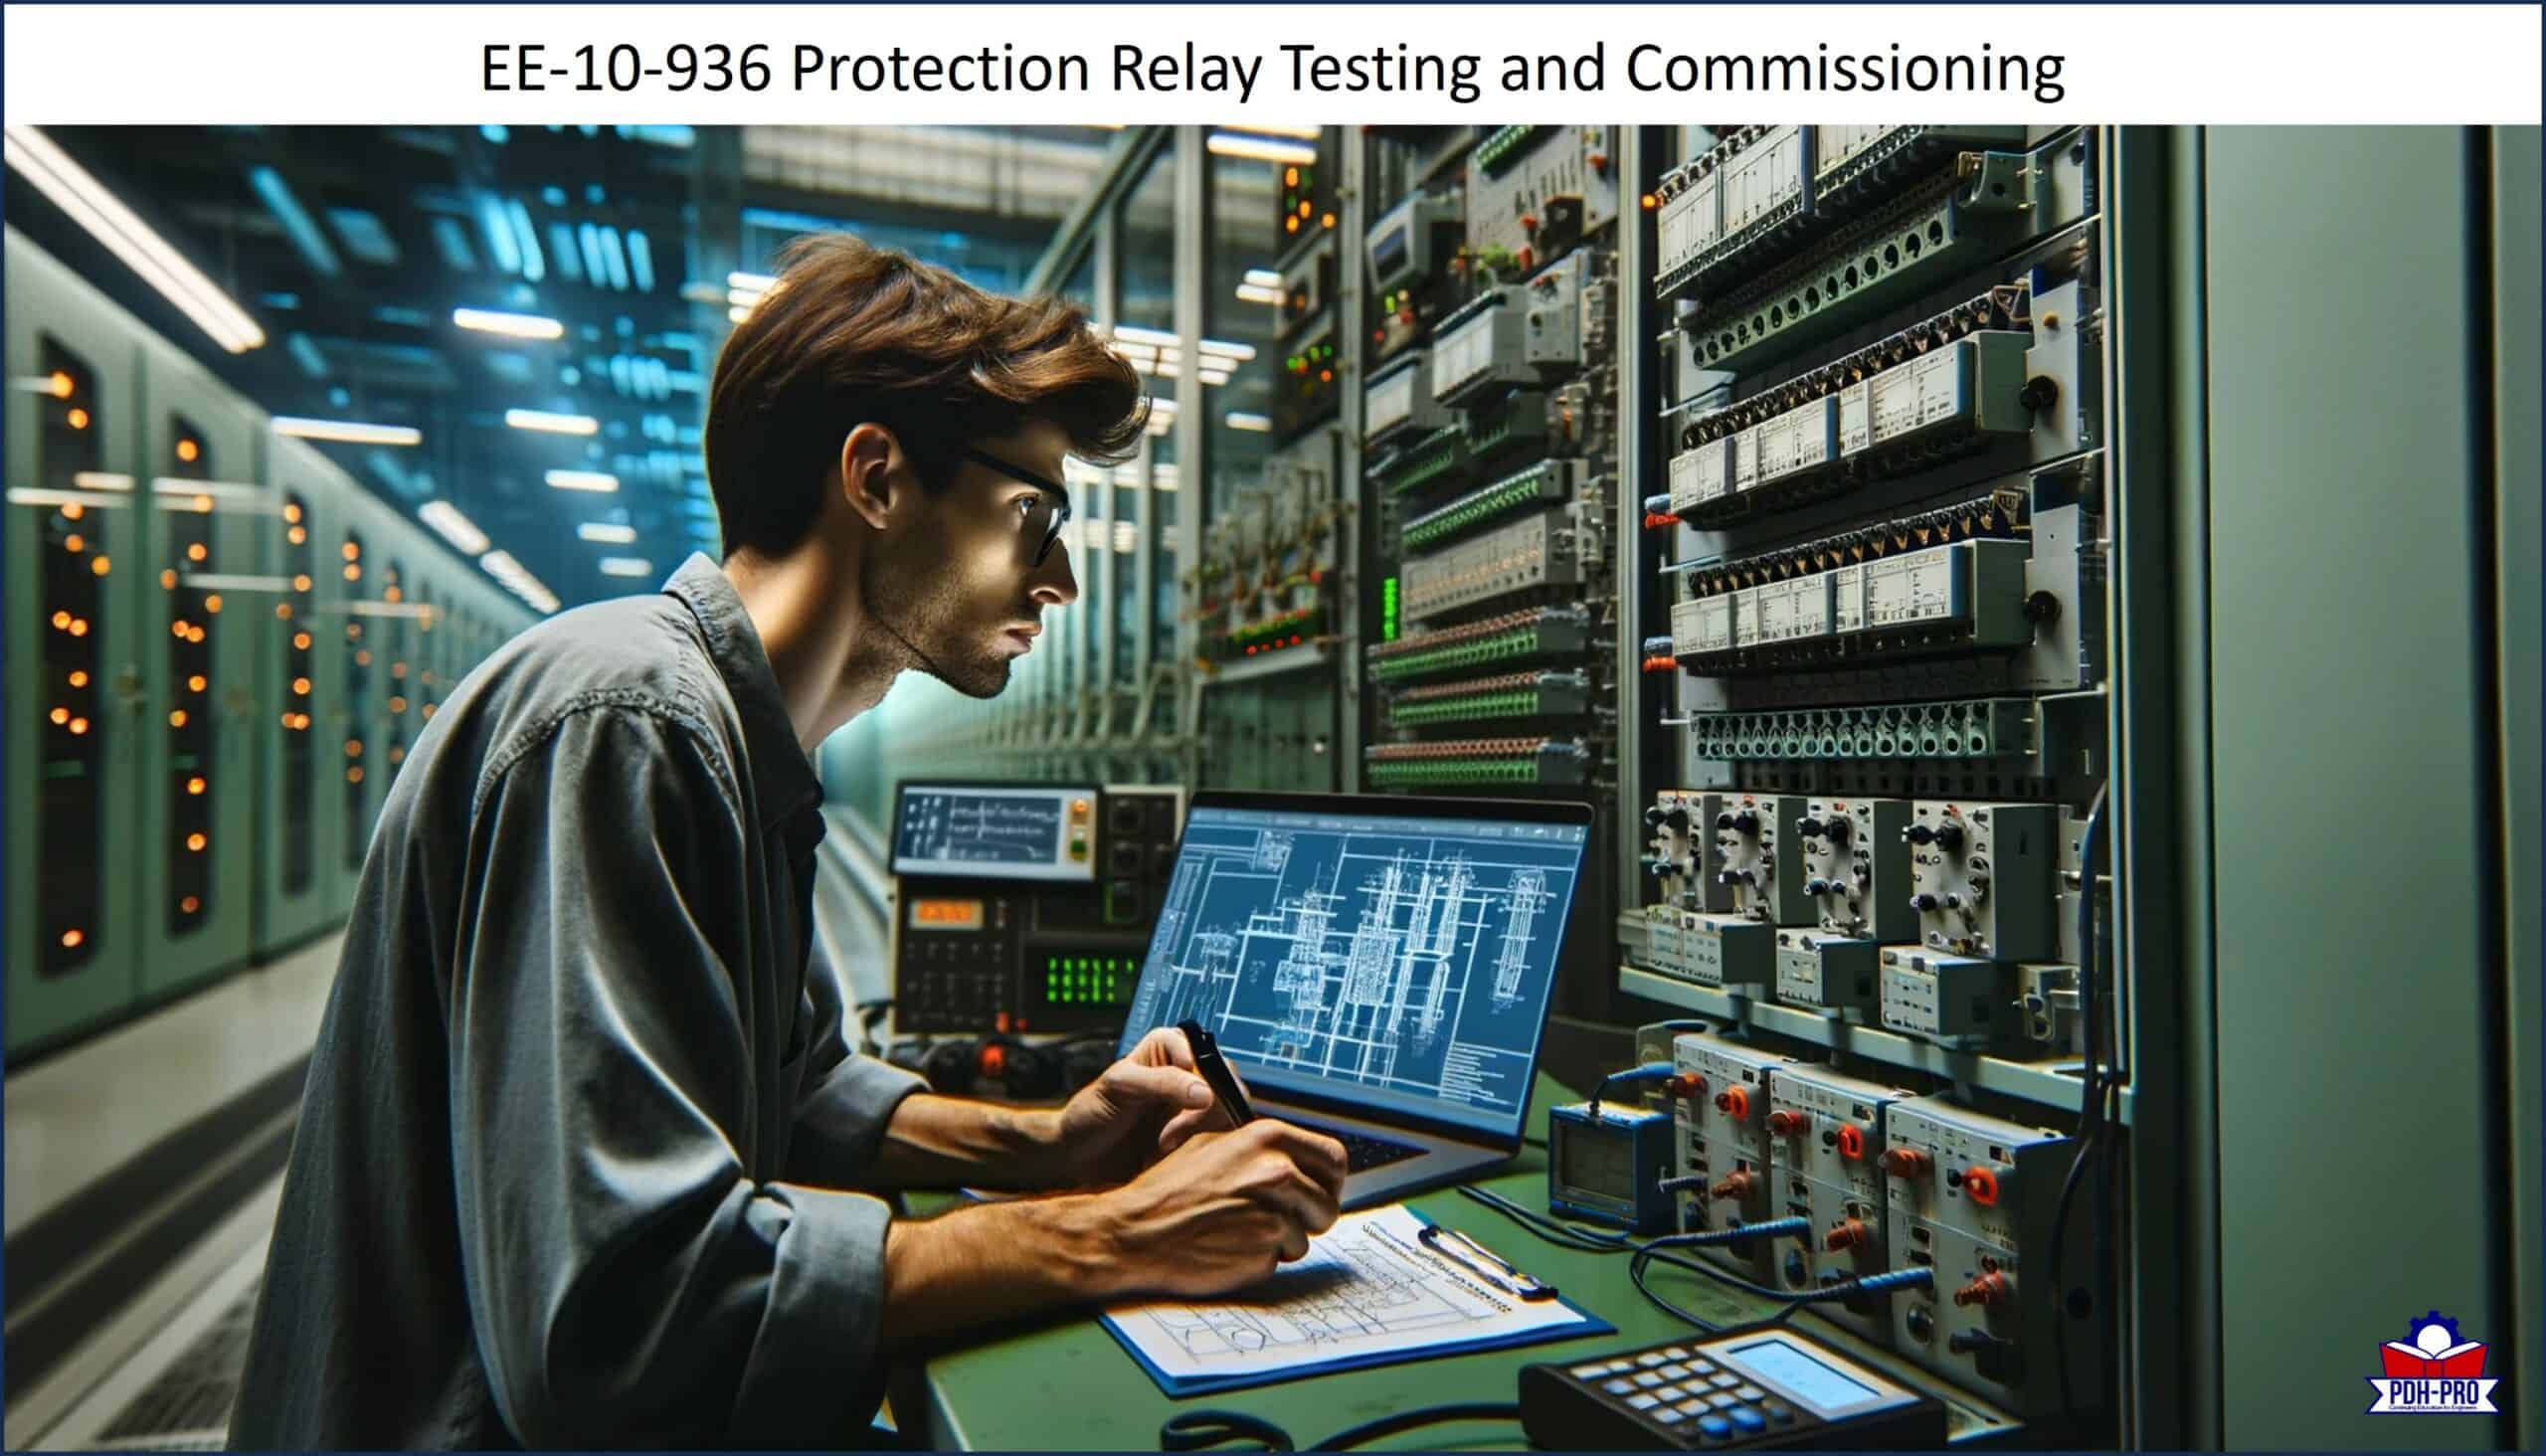 Protection Relay Testing and Commissioning